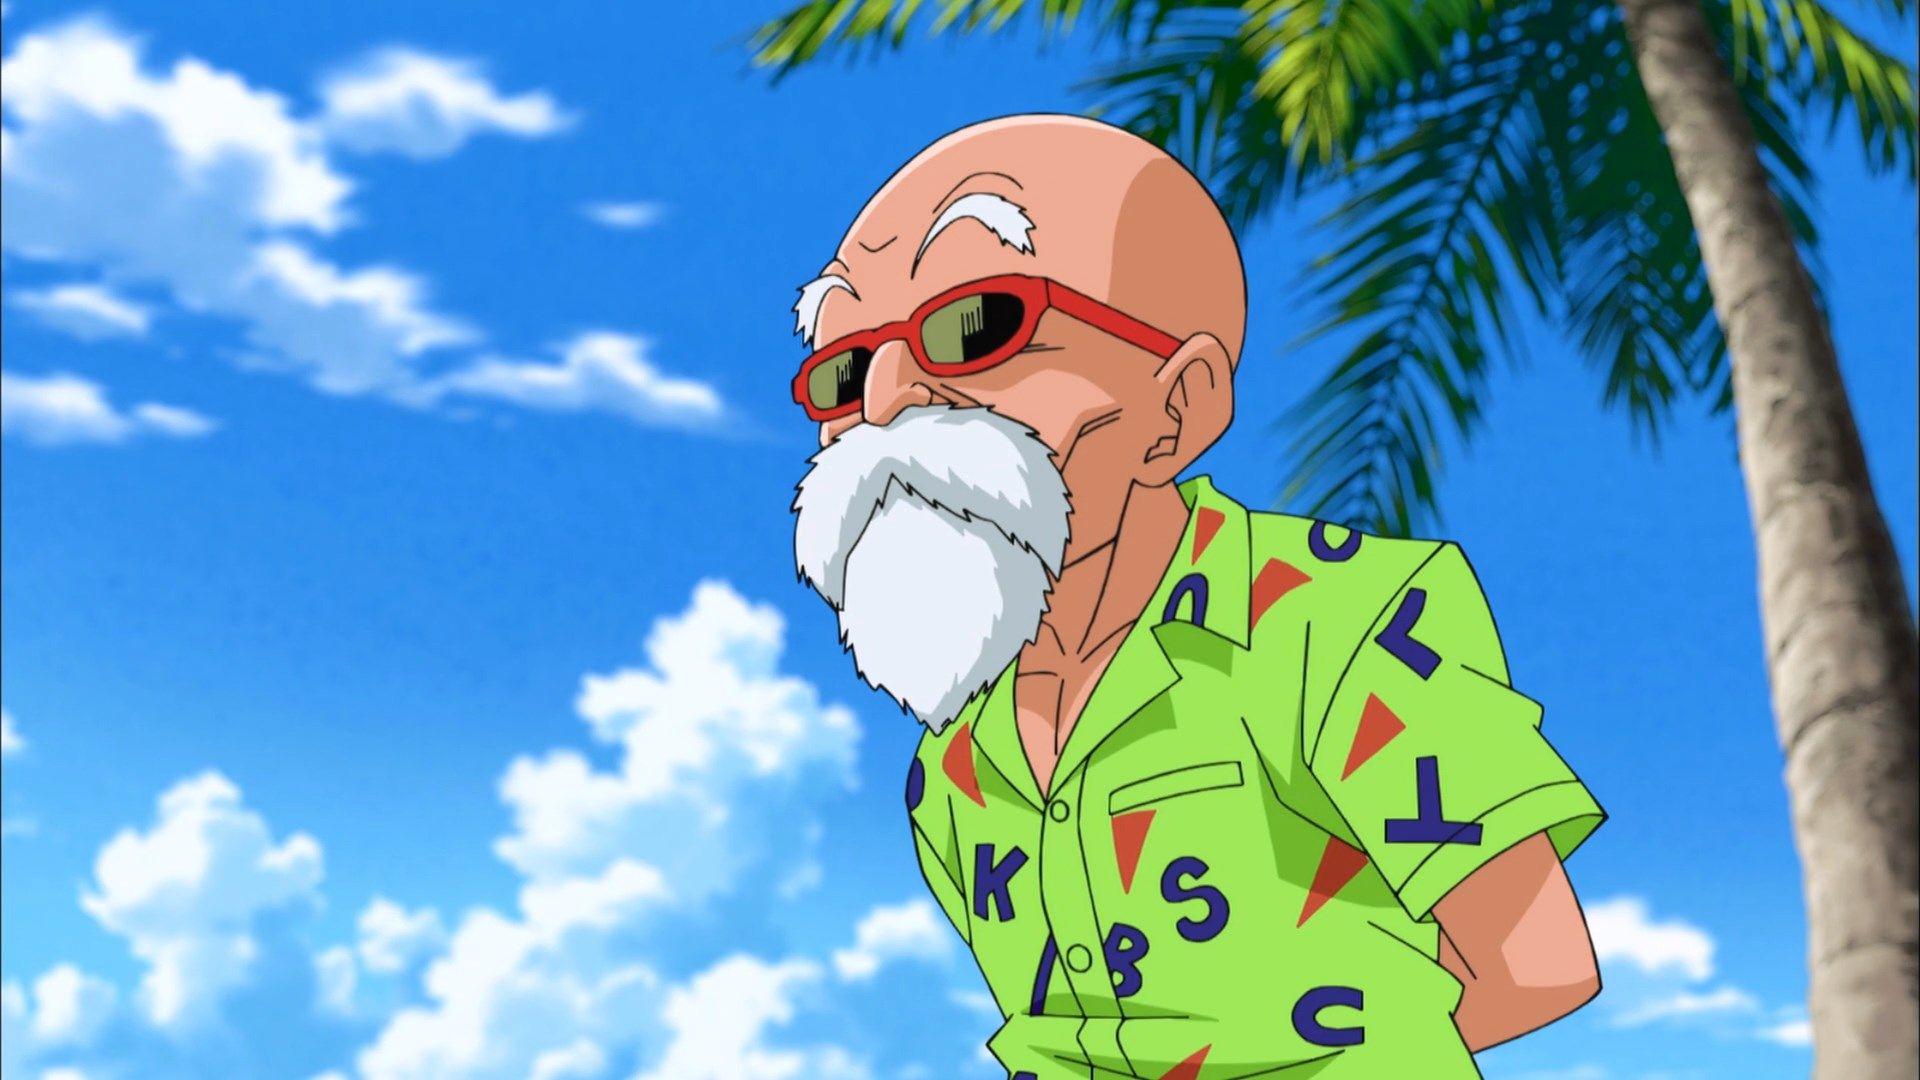 Master Roshi Wallpapers Top Free Master Roshi Backgrounds Wallpaperaccess